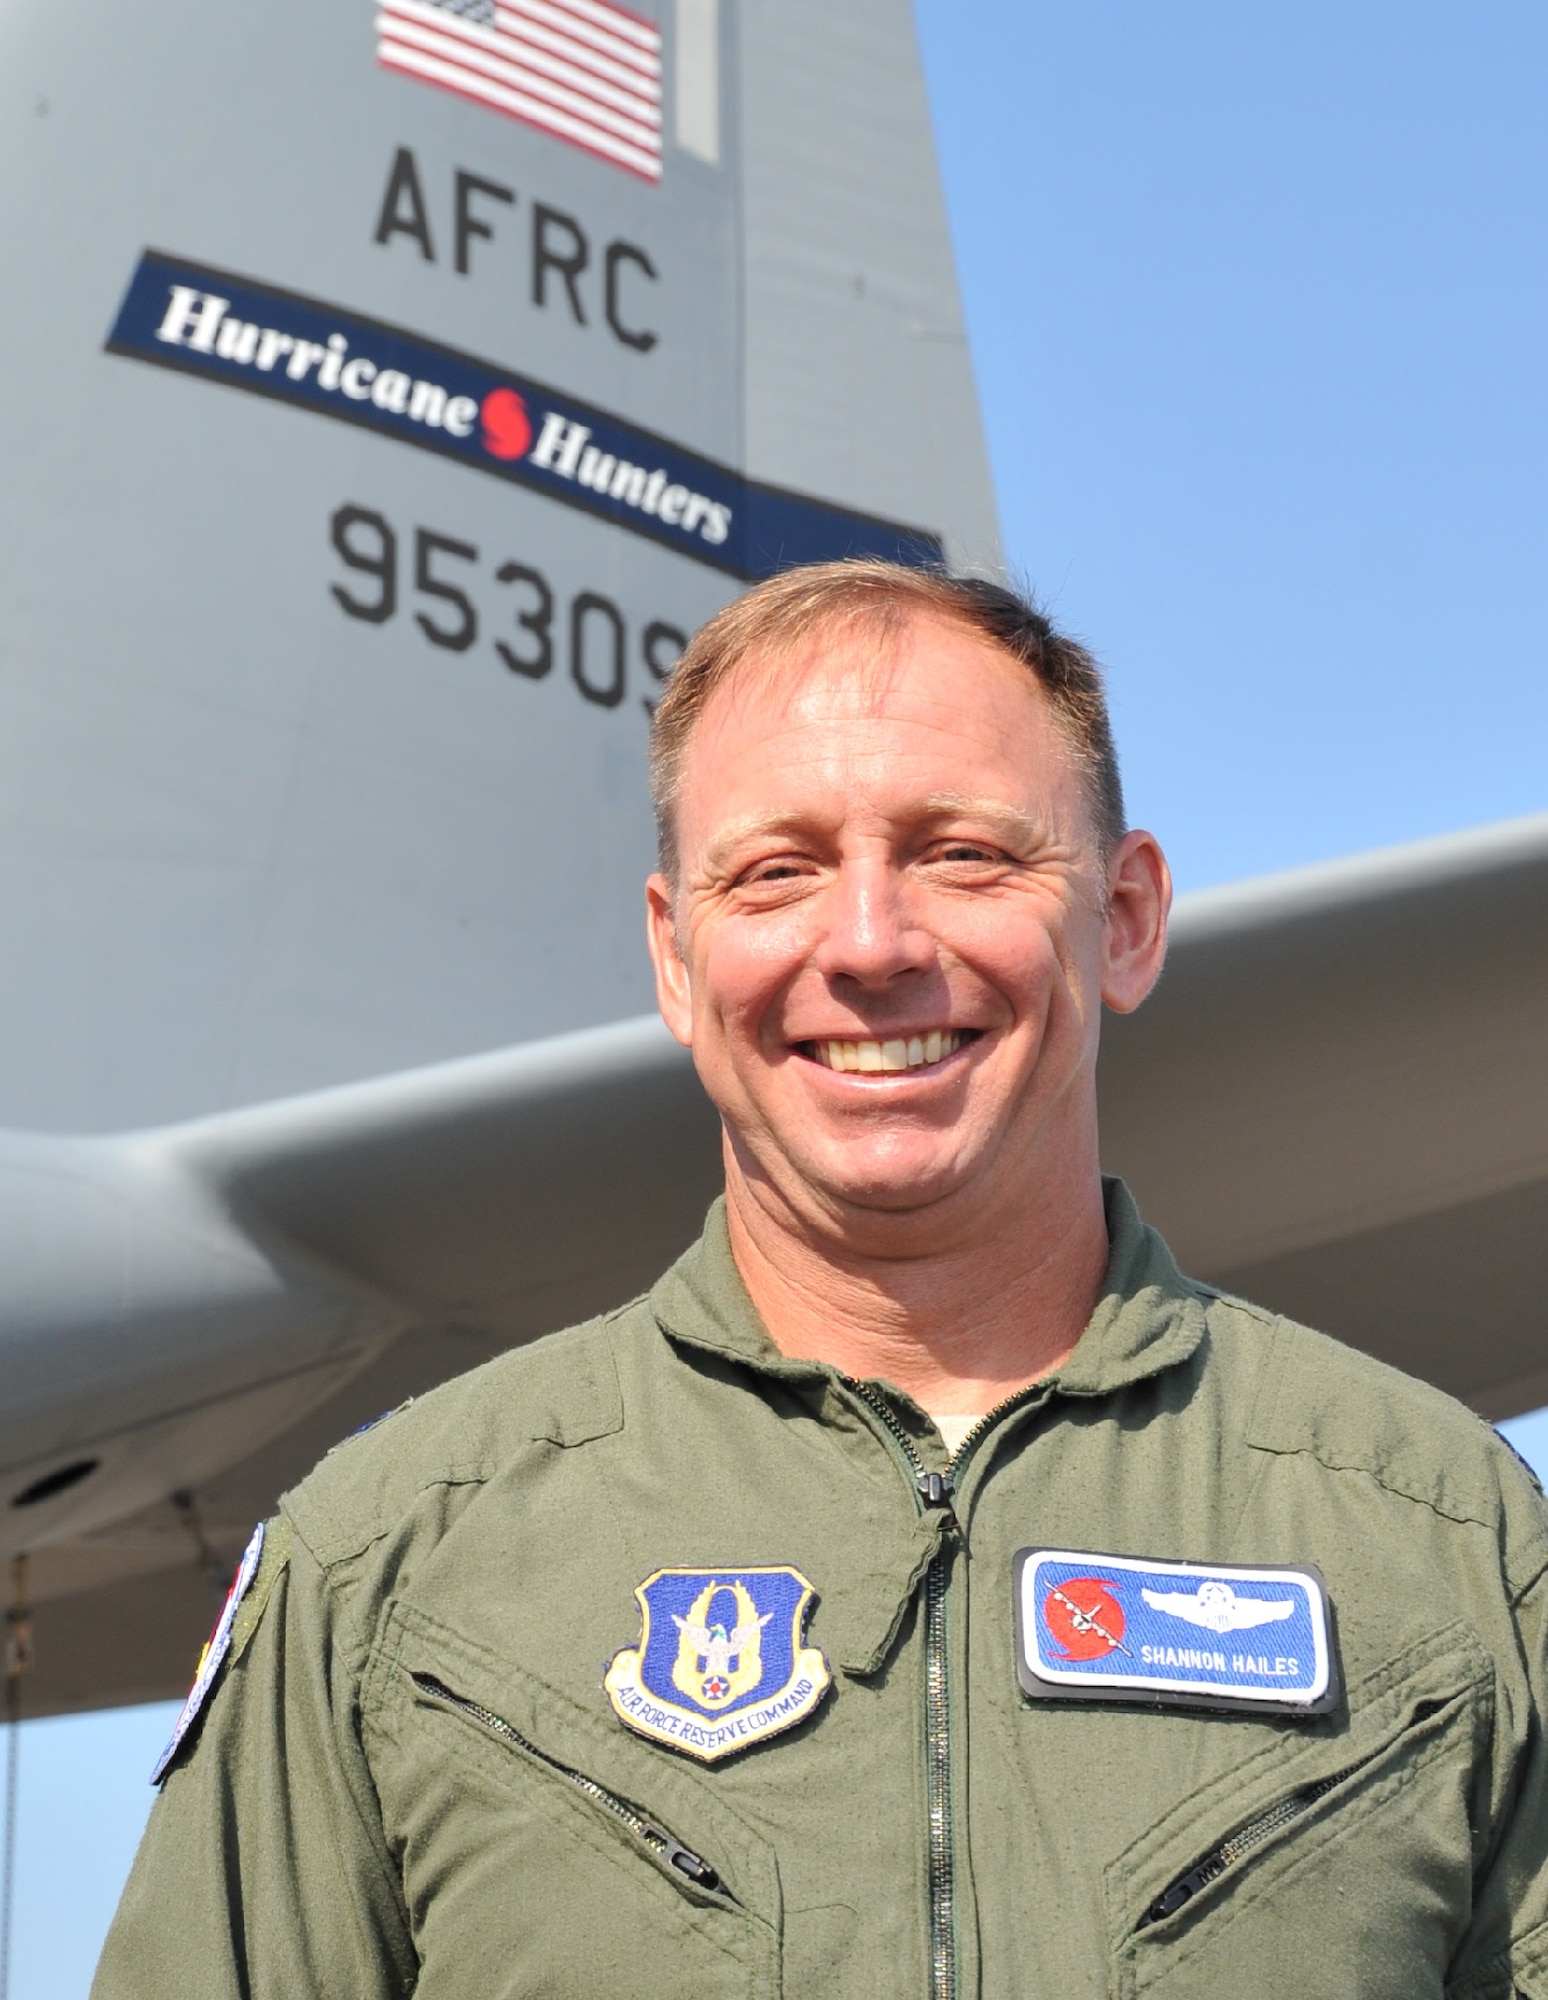 Lt. Col. Shannon Hailes, 815th Airlift Squadron director of operations, flew Hurricane Katrina in 2005 when he was a pilot with the 53rd Weather Reconnaissance Squadron, 403rd Wing, Keesler Air Force Base, Mississippi. (U.S. Air Force photo/Maj. Marnee A.C. Losurdo)